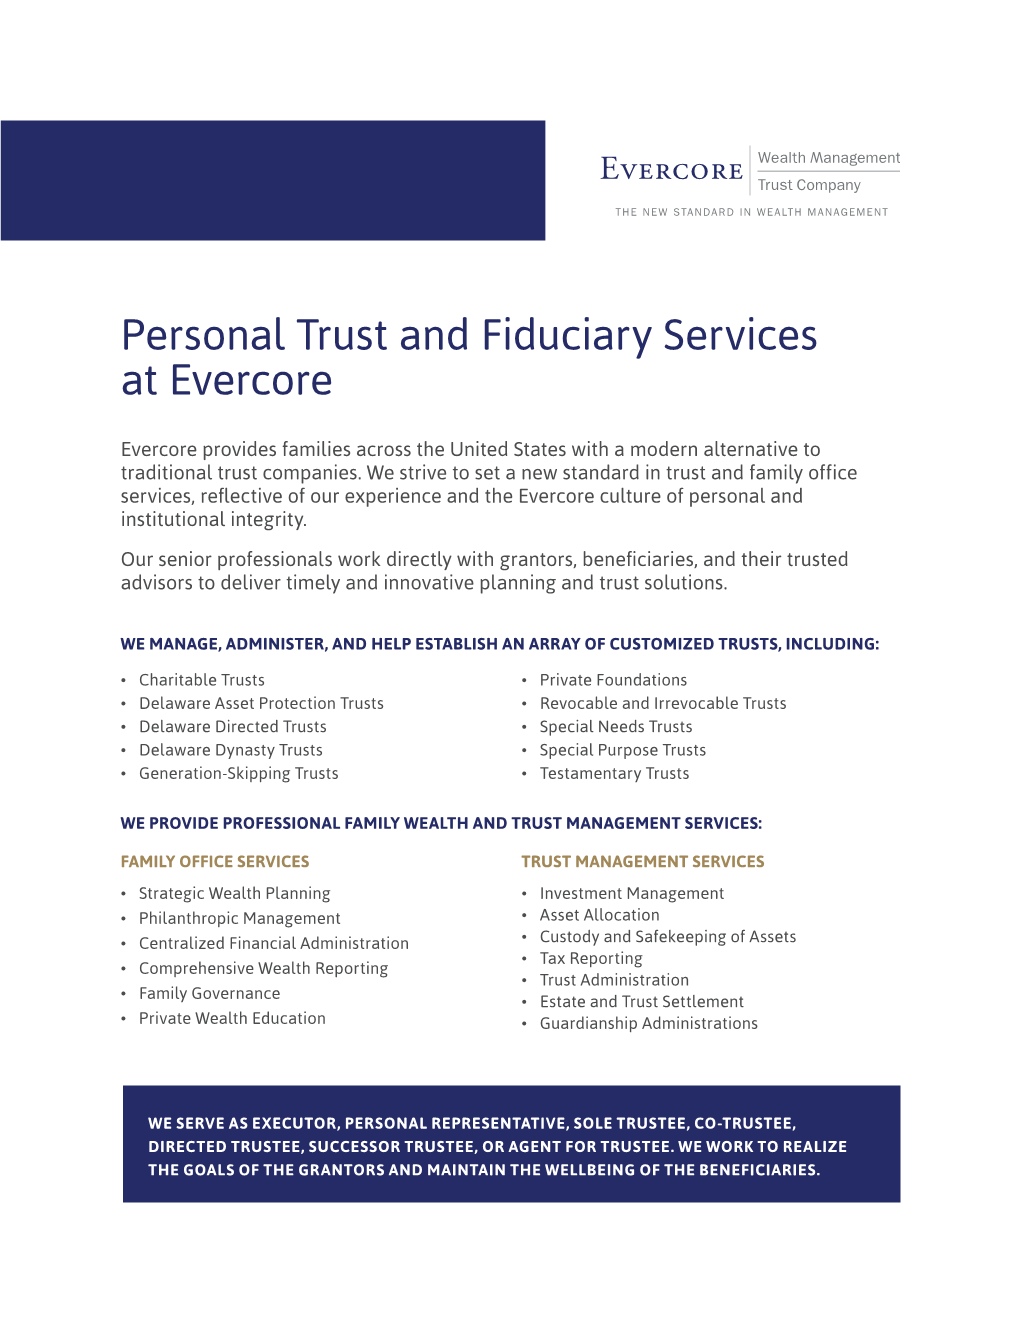 Personal Trust and Fiduciary Services at Evercore